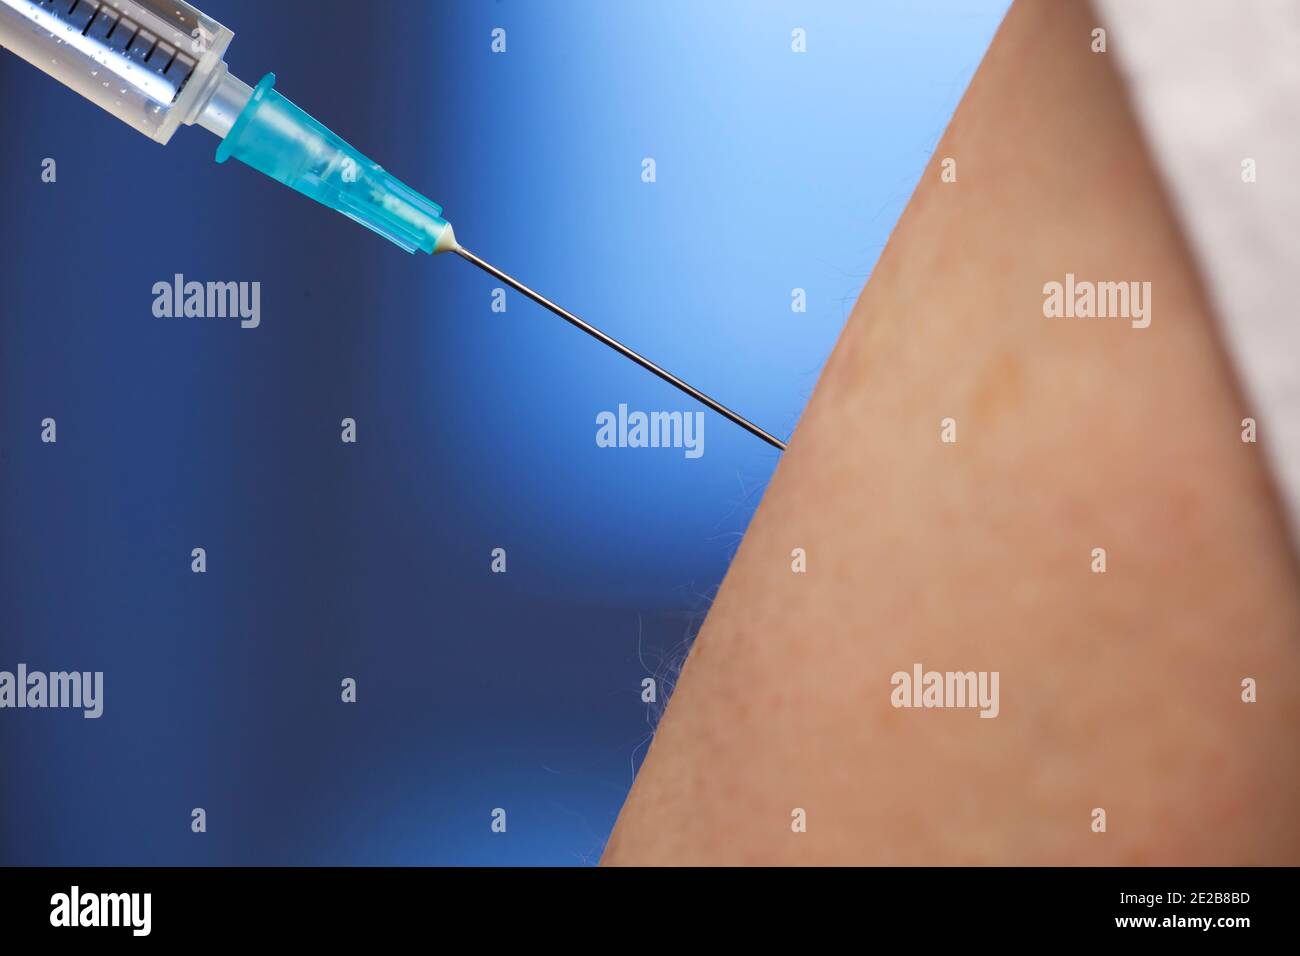 Close-up of vaccination with syringe in upper arm - focus on the needle - blue background Stock Photo